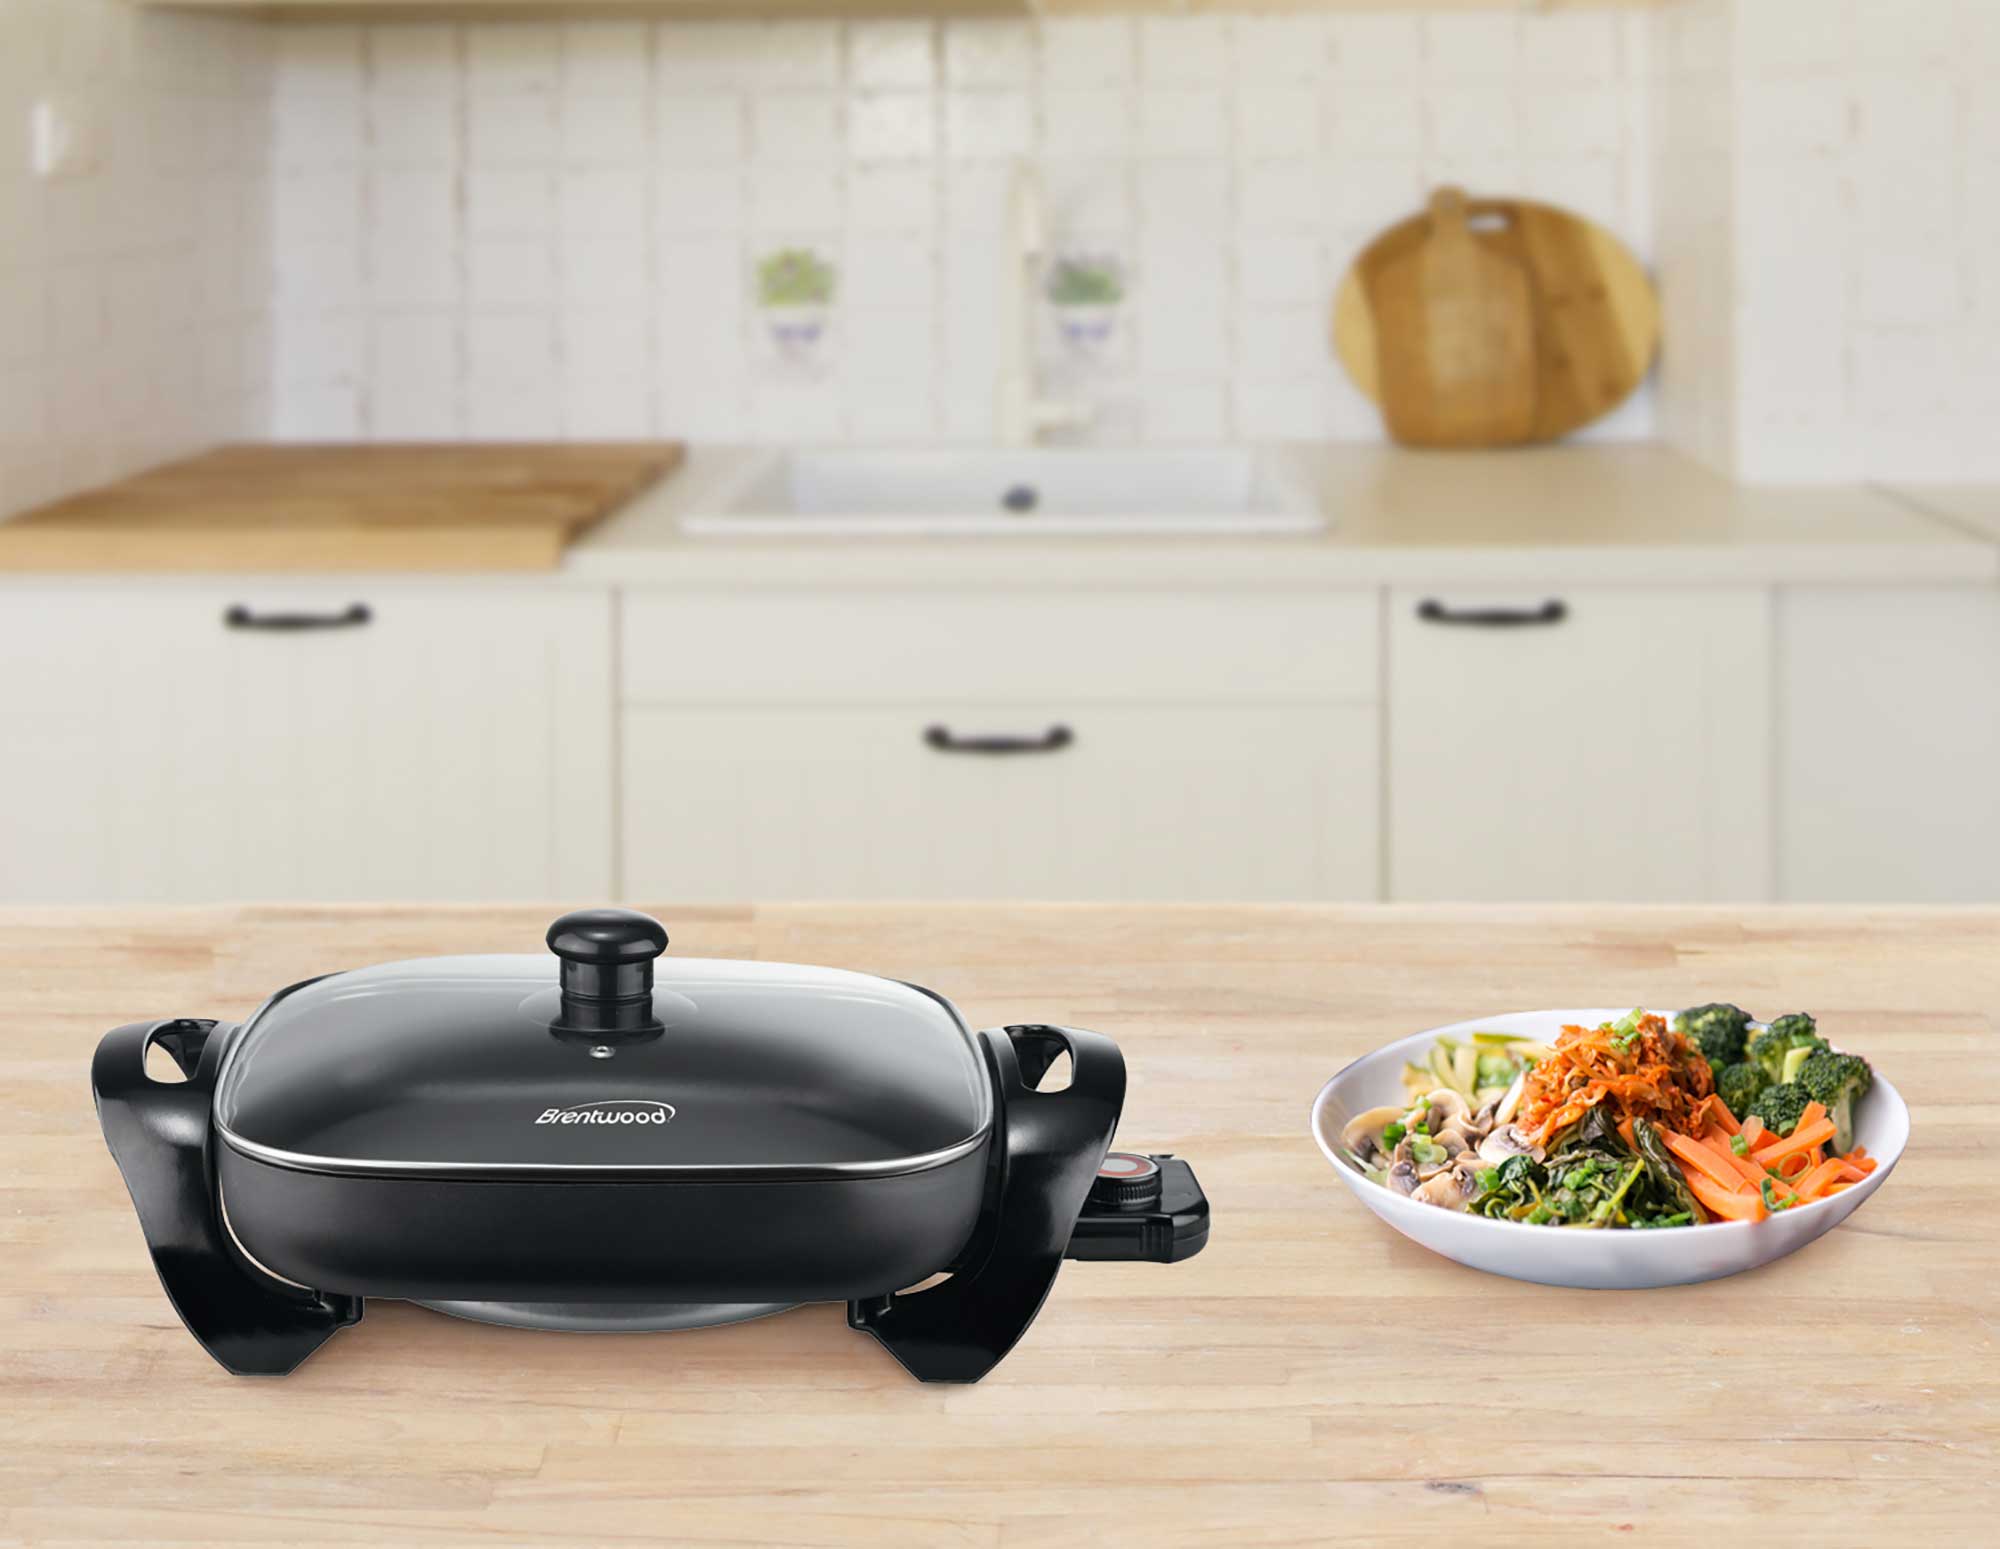 Brentwood 8-Inch Nonstick Electric Skillet with Glass Lid - Megerbworld